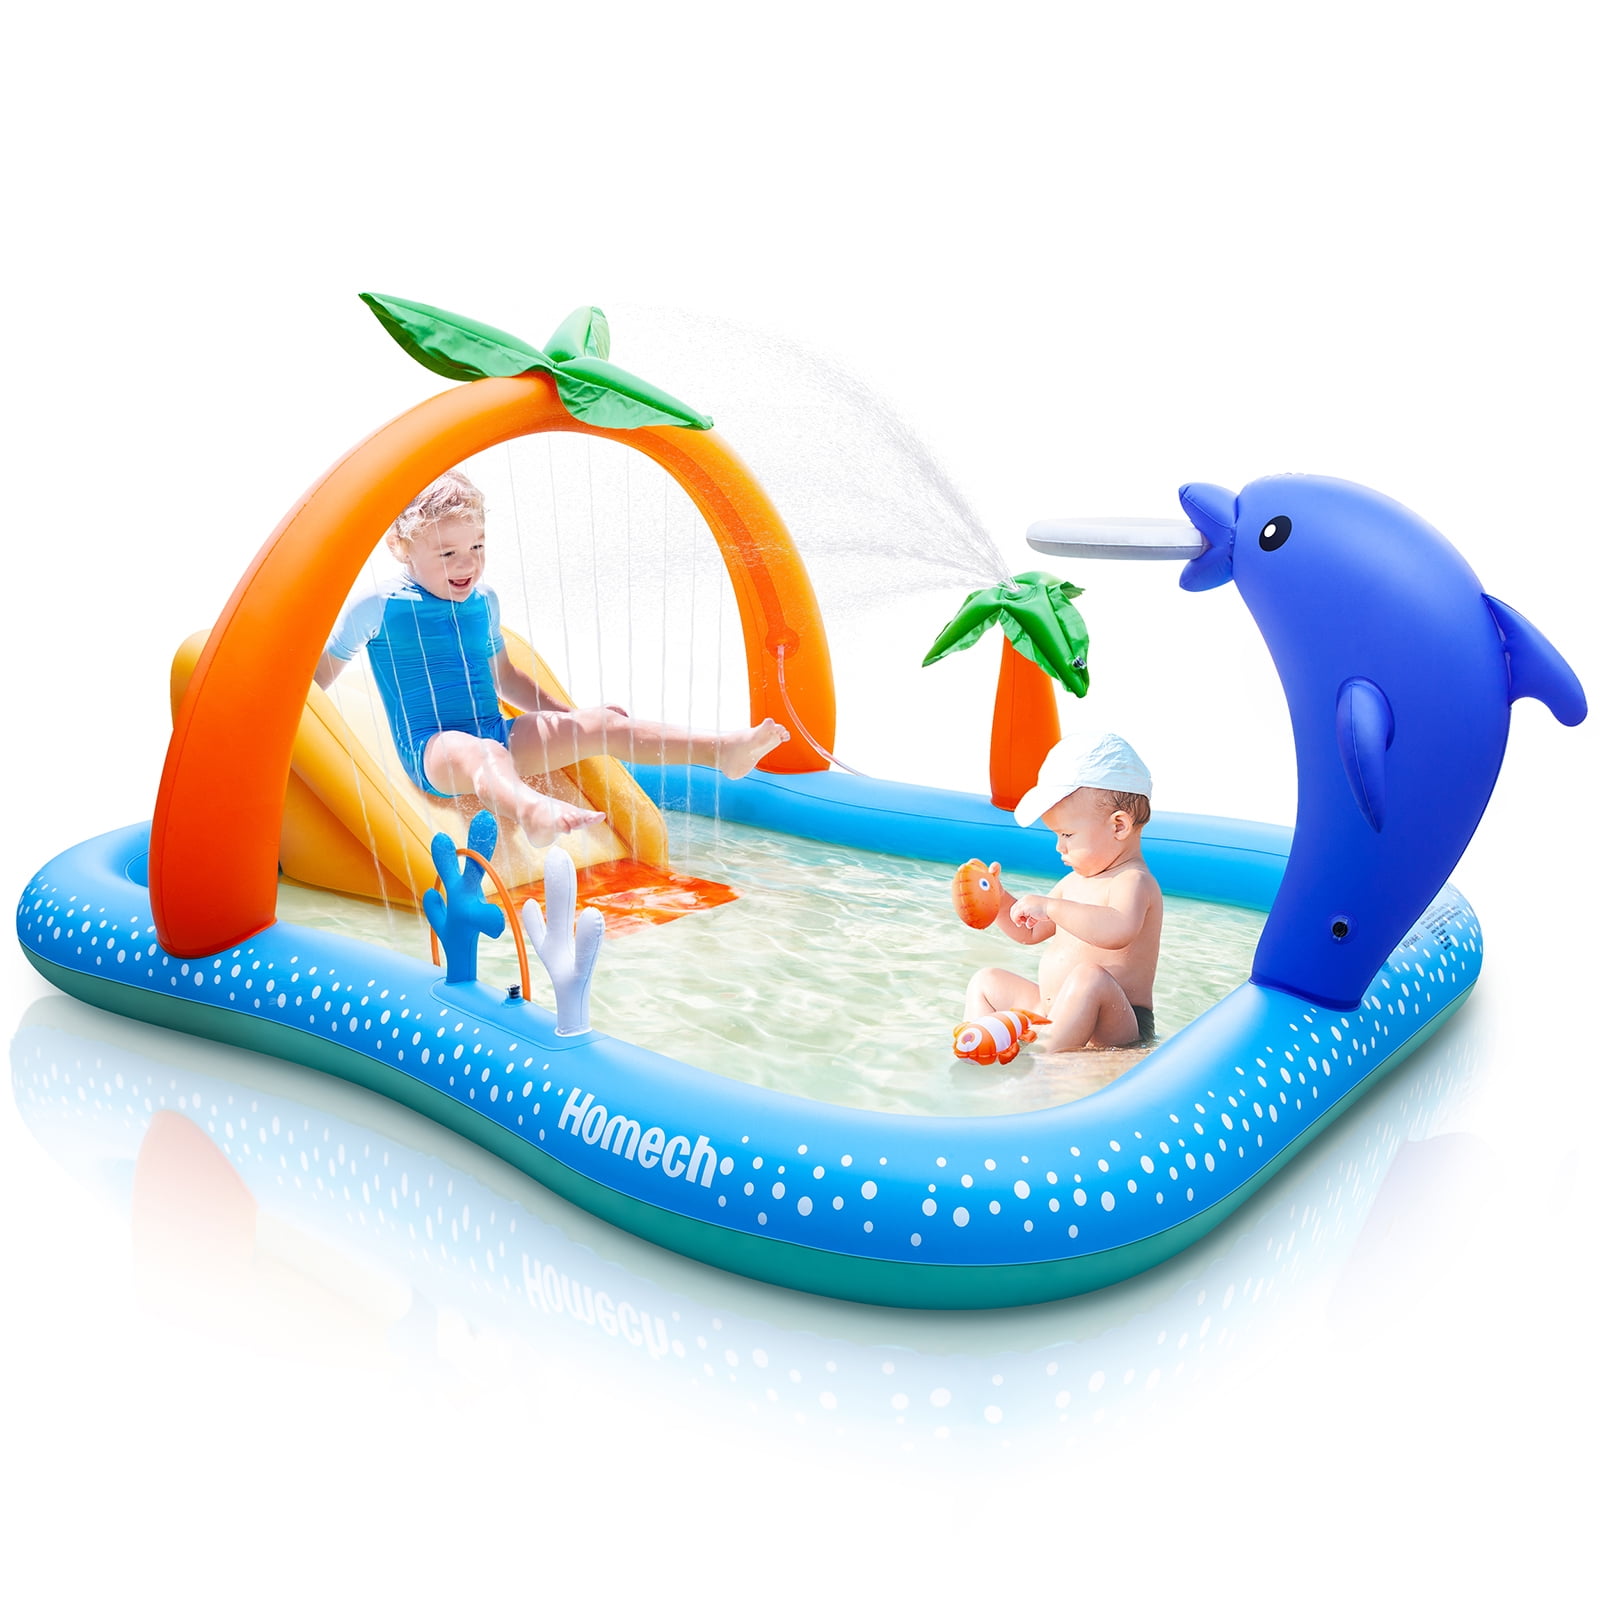 Inflatable Play Center Hesung Full-sized Kiddie Pool Slide Fountain Arch USA for sale online 